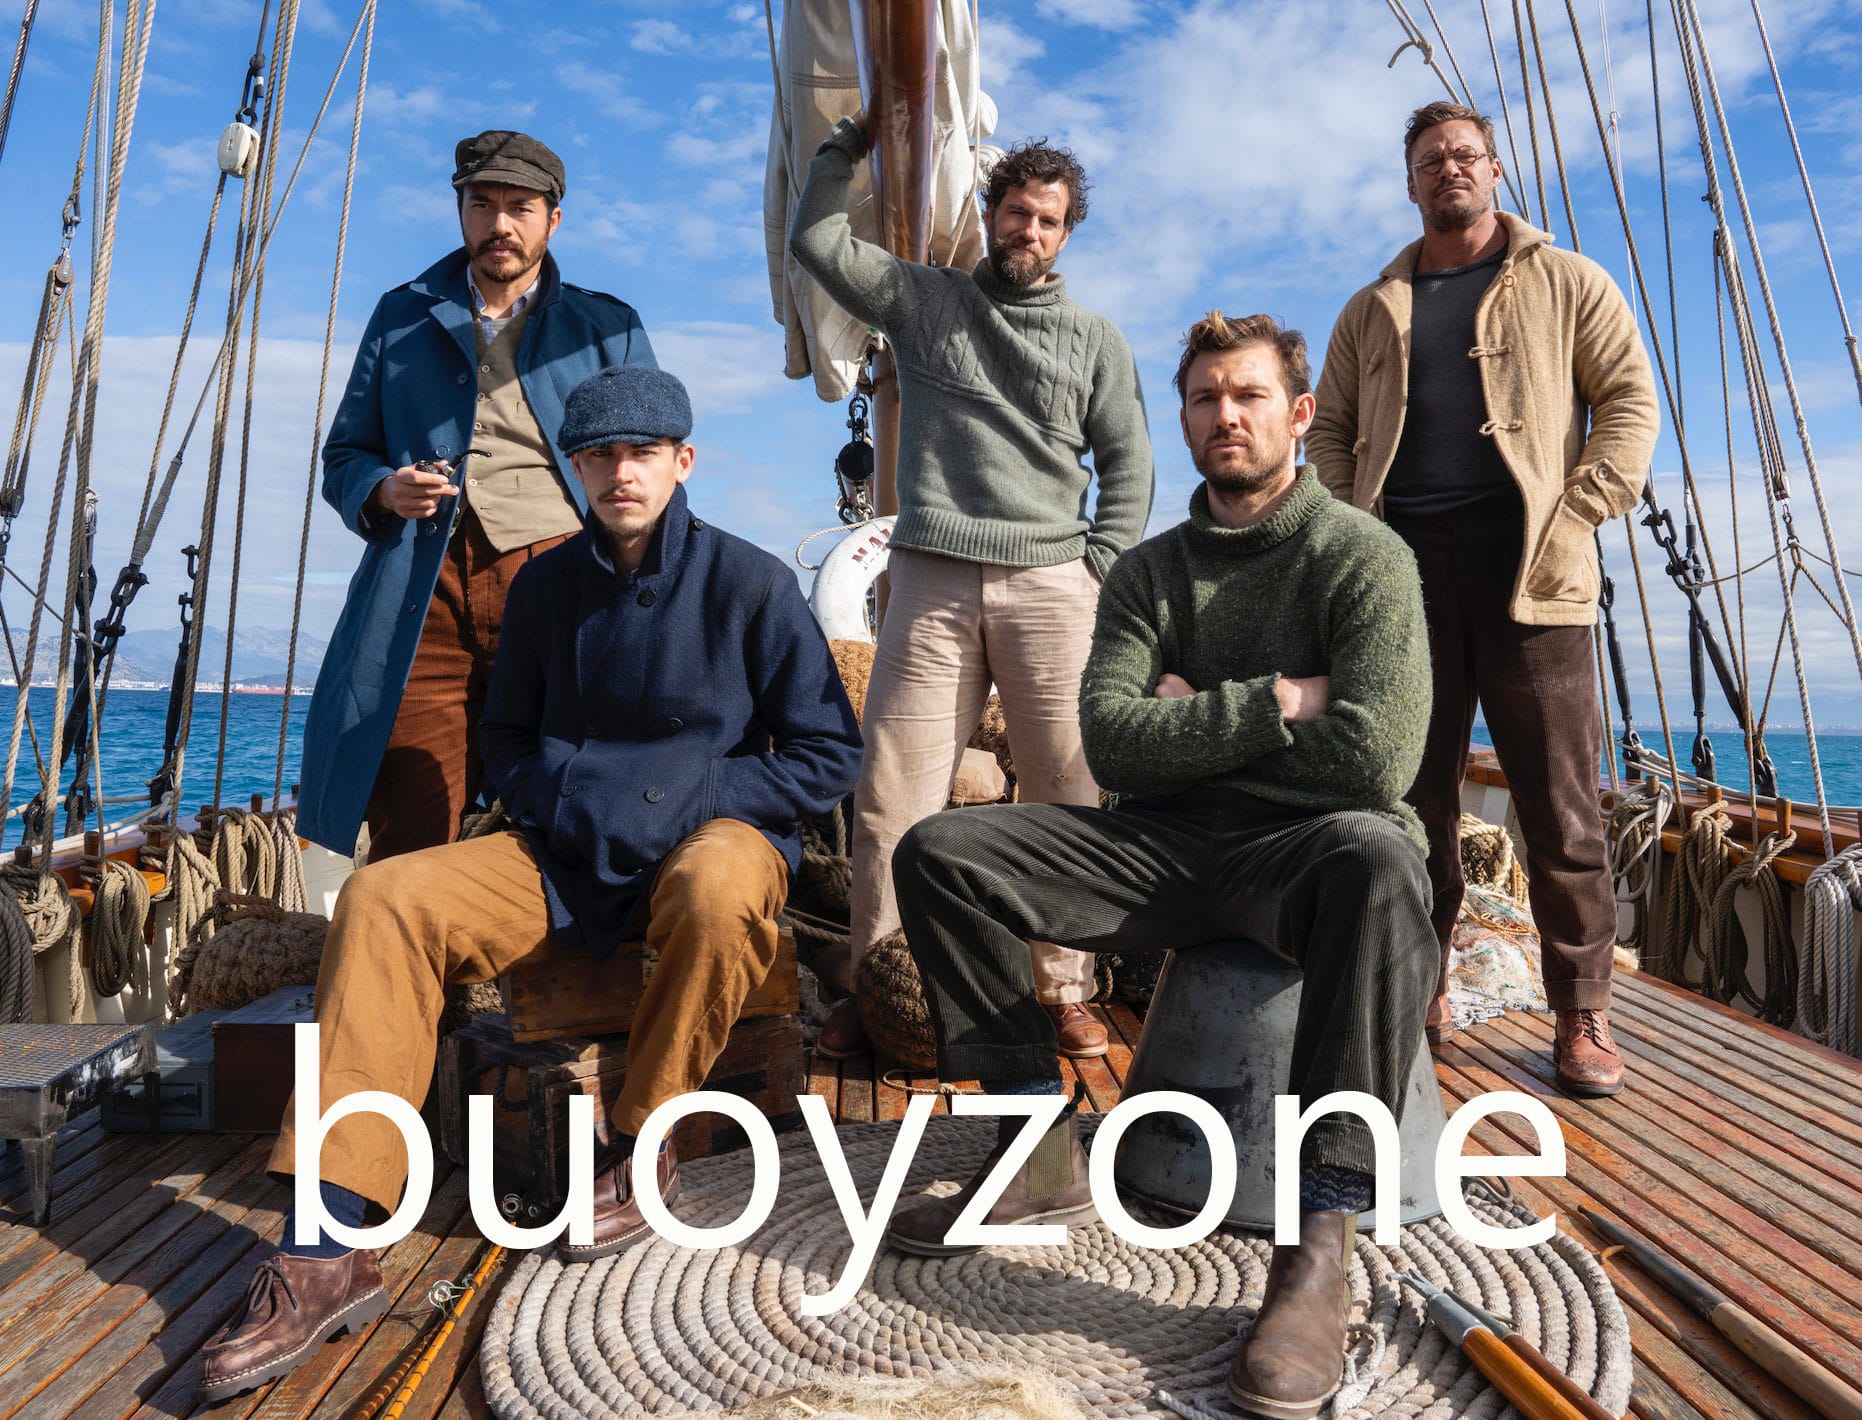 Five handsome men in a selection of rustic knits posing on the deck of a ship. Three are standing with two sitting in the front. Large text across the bottom of the photo says "buoyzone".